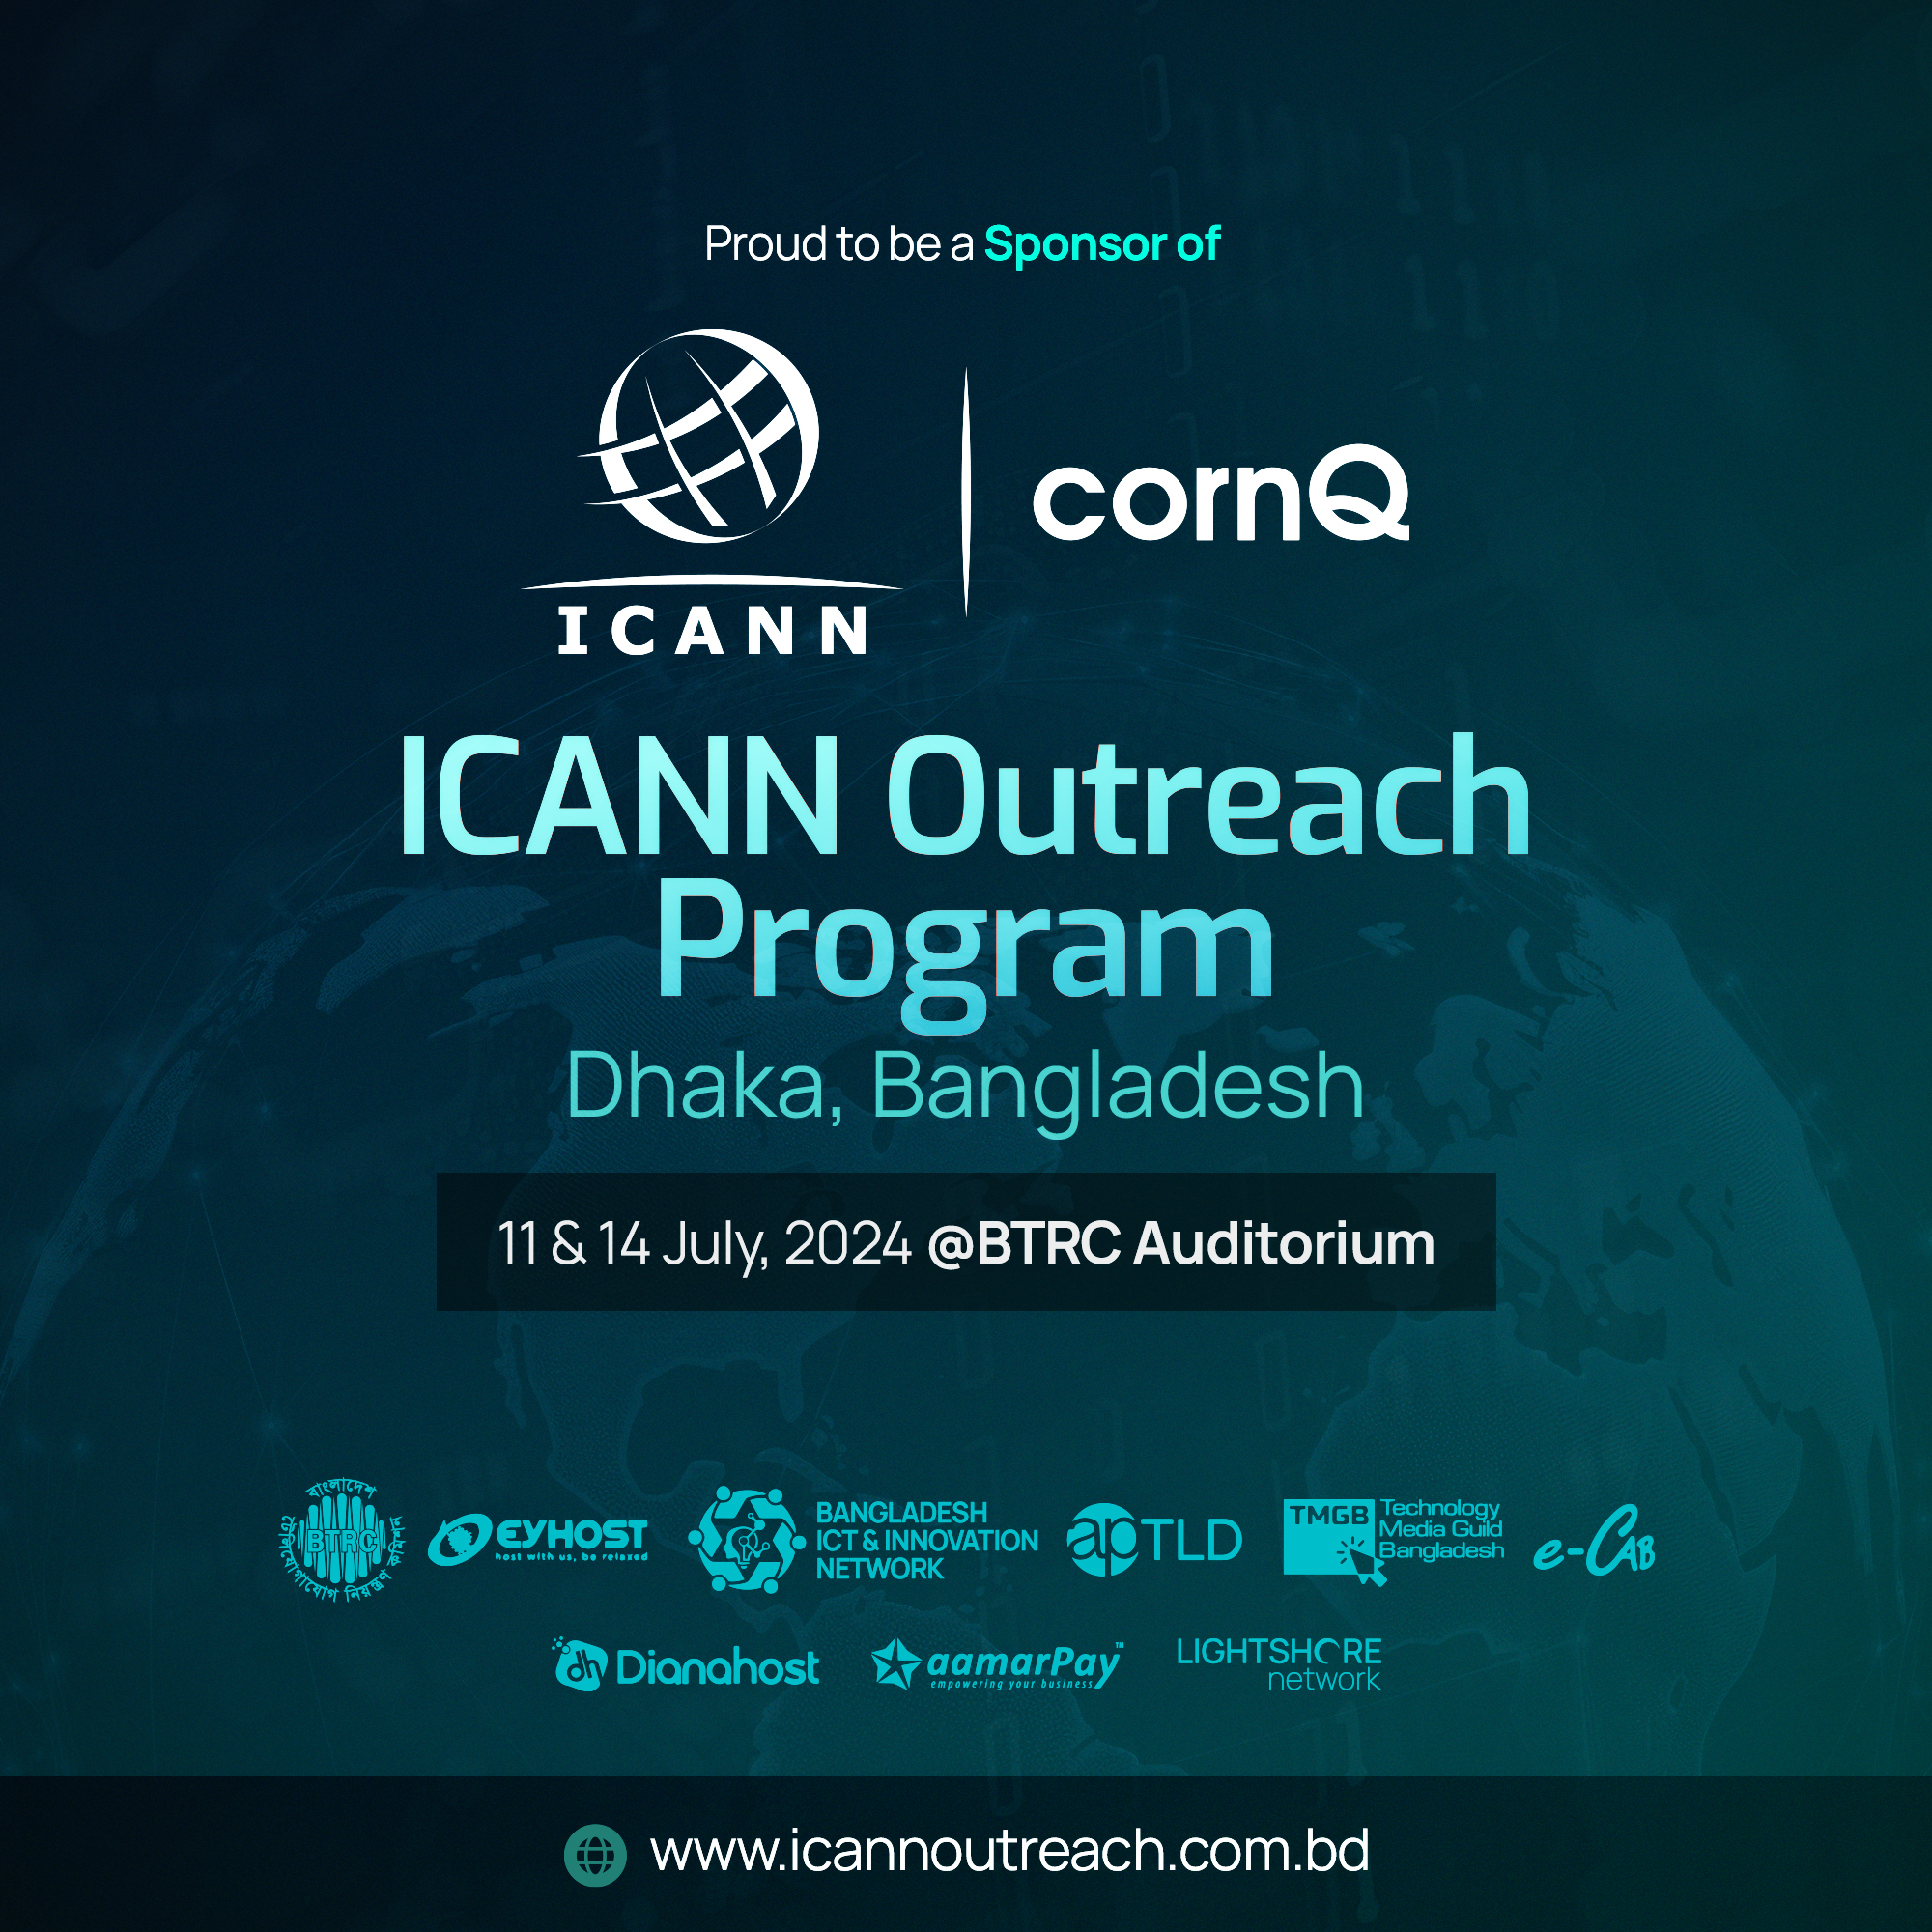 CORNQ Partners with ICANN Outreach Program in Dhaka